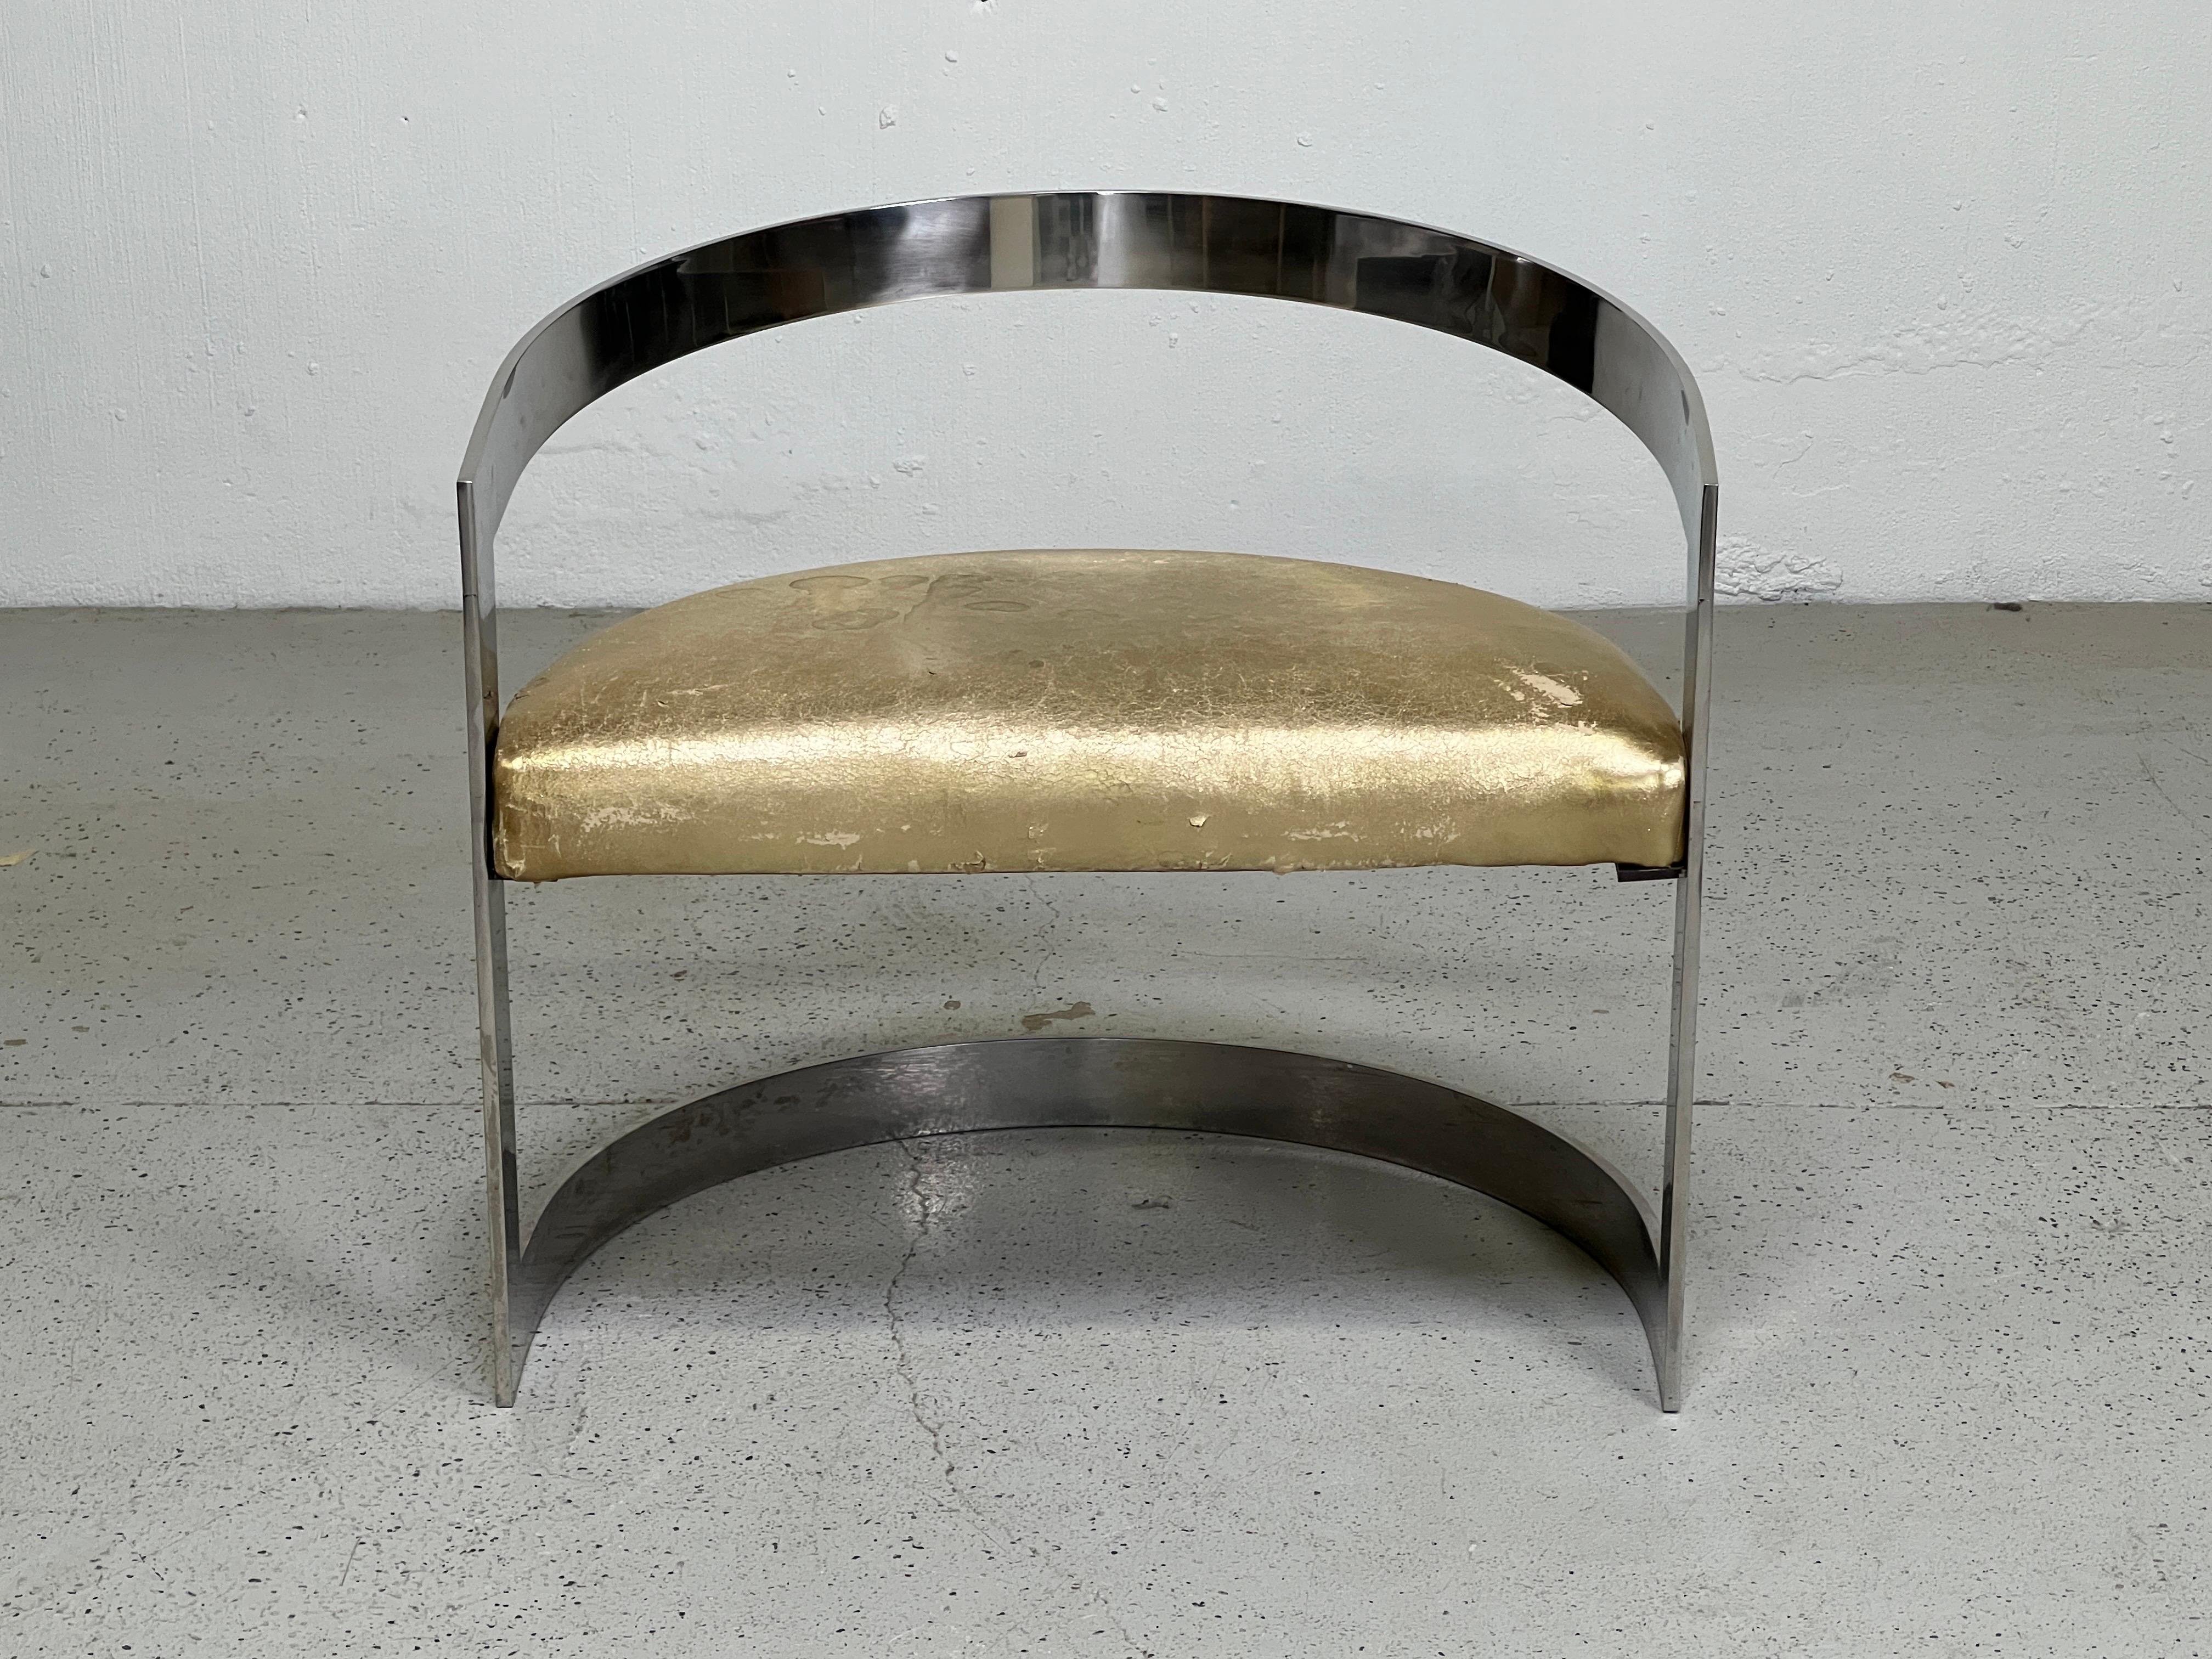 Polished Stainless Steel Lounge Chair Attributed to Karl Springer In Good Condition For Sale In Dallas, TX